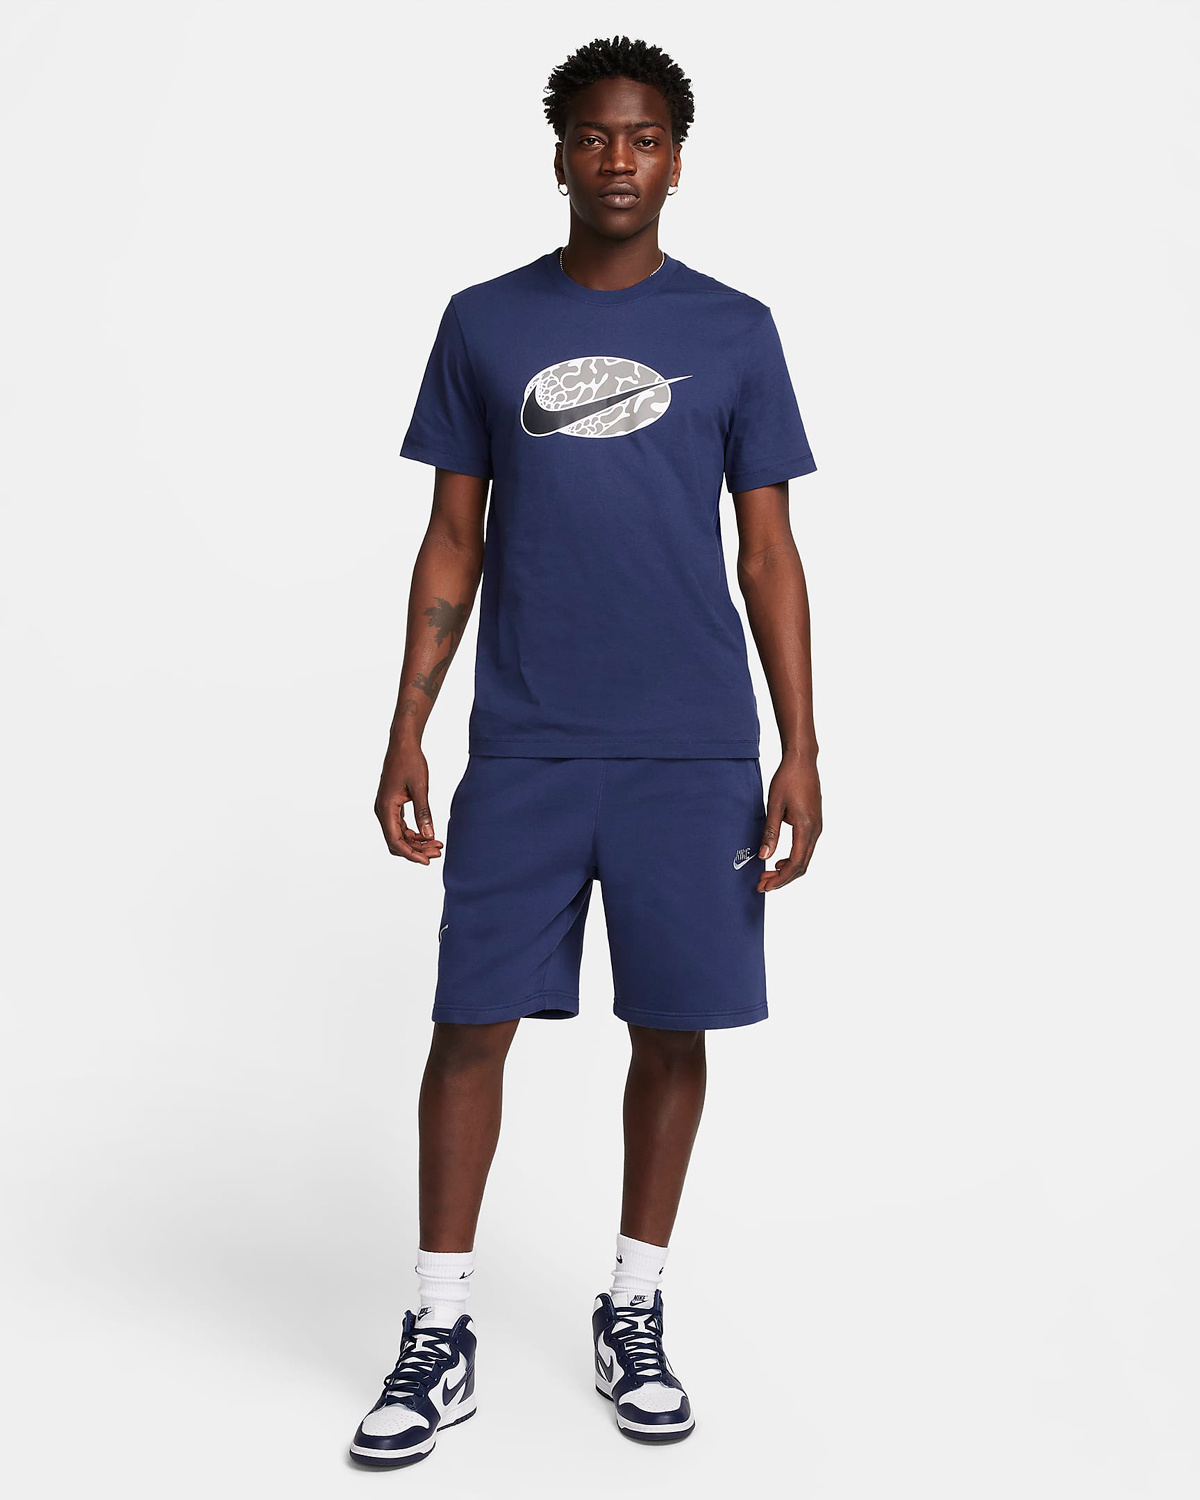 Nike Sportswear Midnight Navy T Shirt Outfit